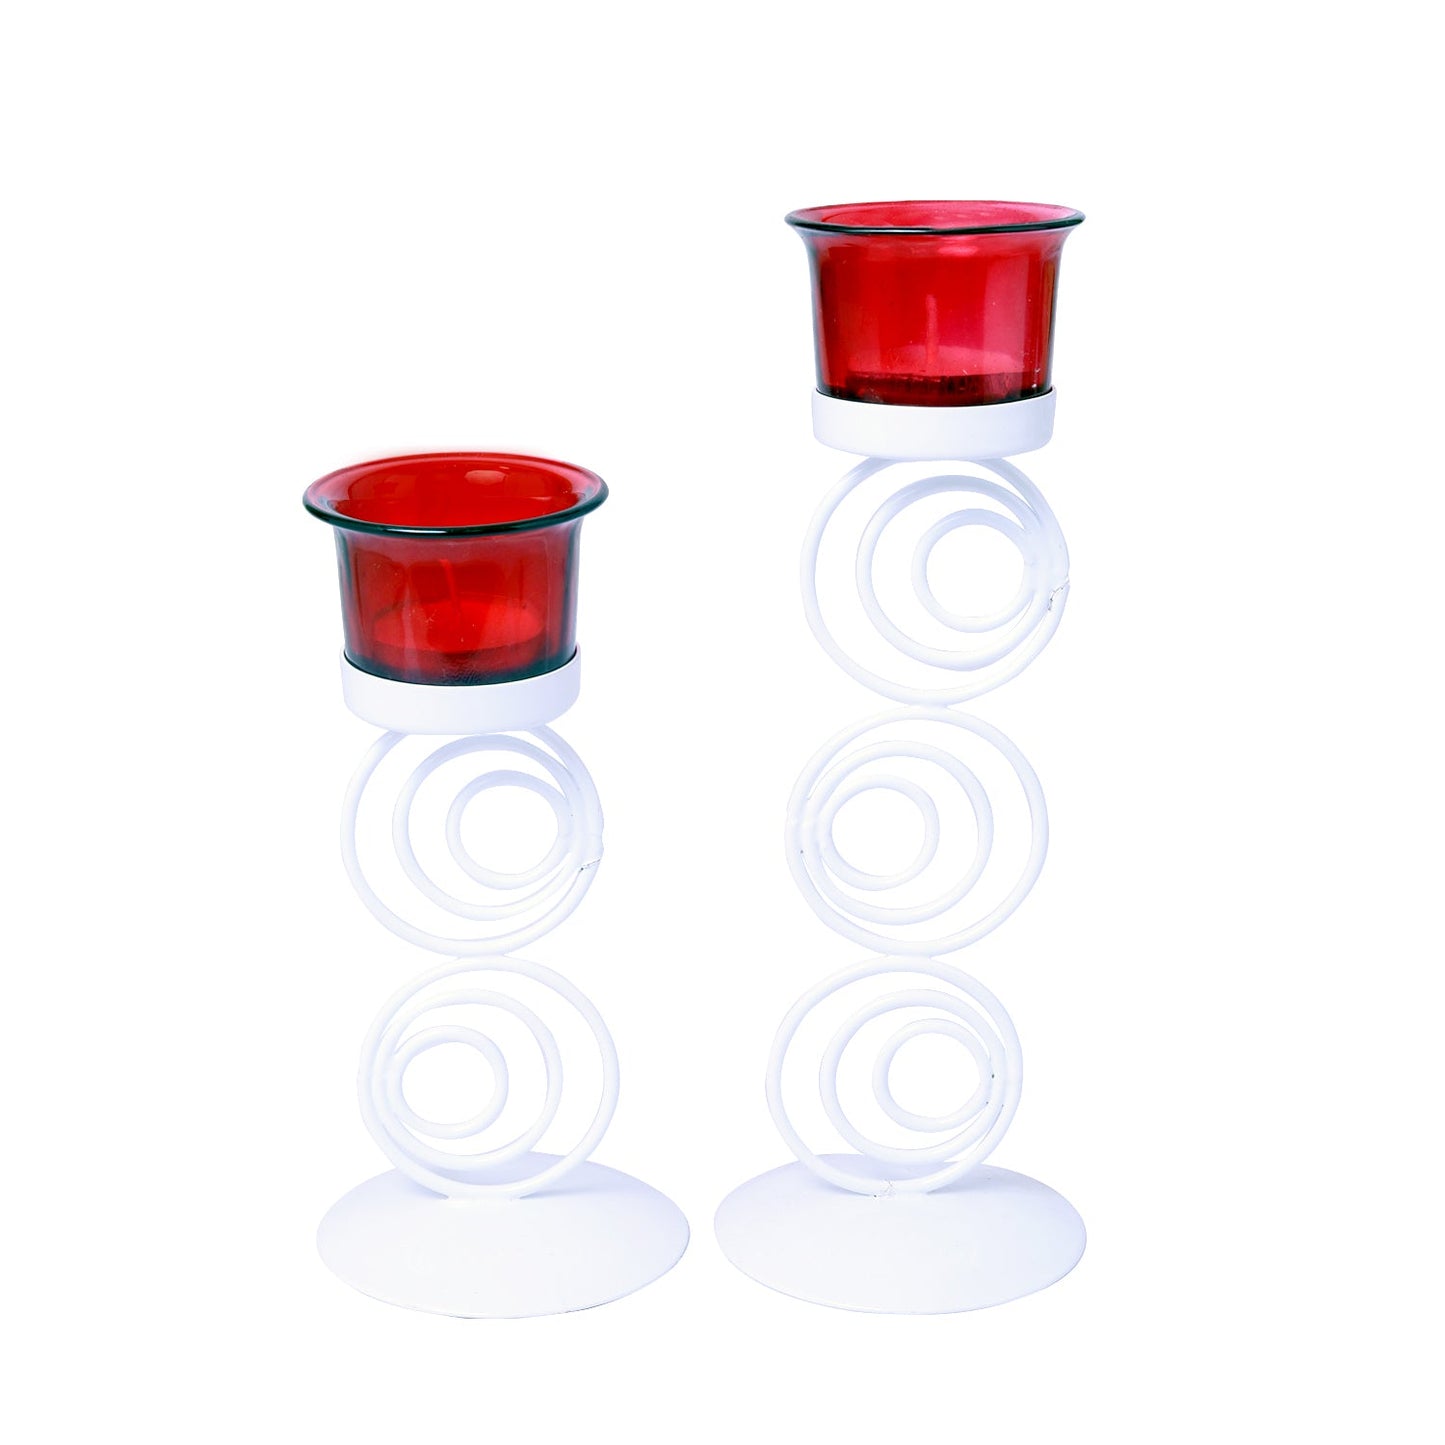 Hosley White Metal Candle Holders with 2 Red Glass for Home Decoration Dinning Table Decoration Candle Wedding Décor, Pack of 2